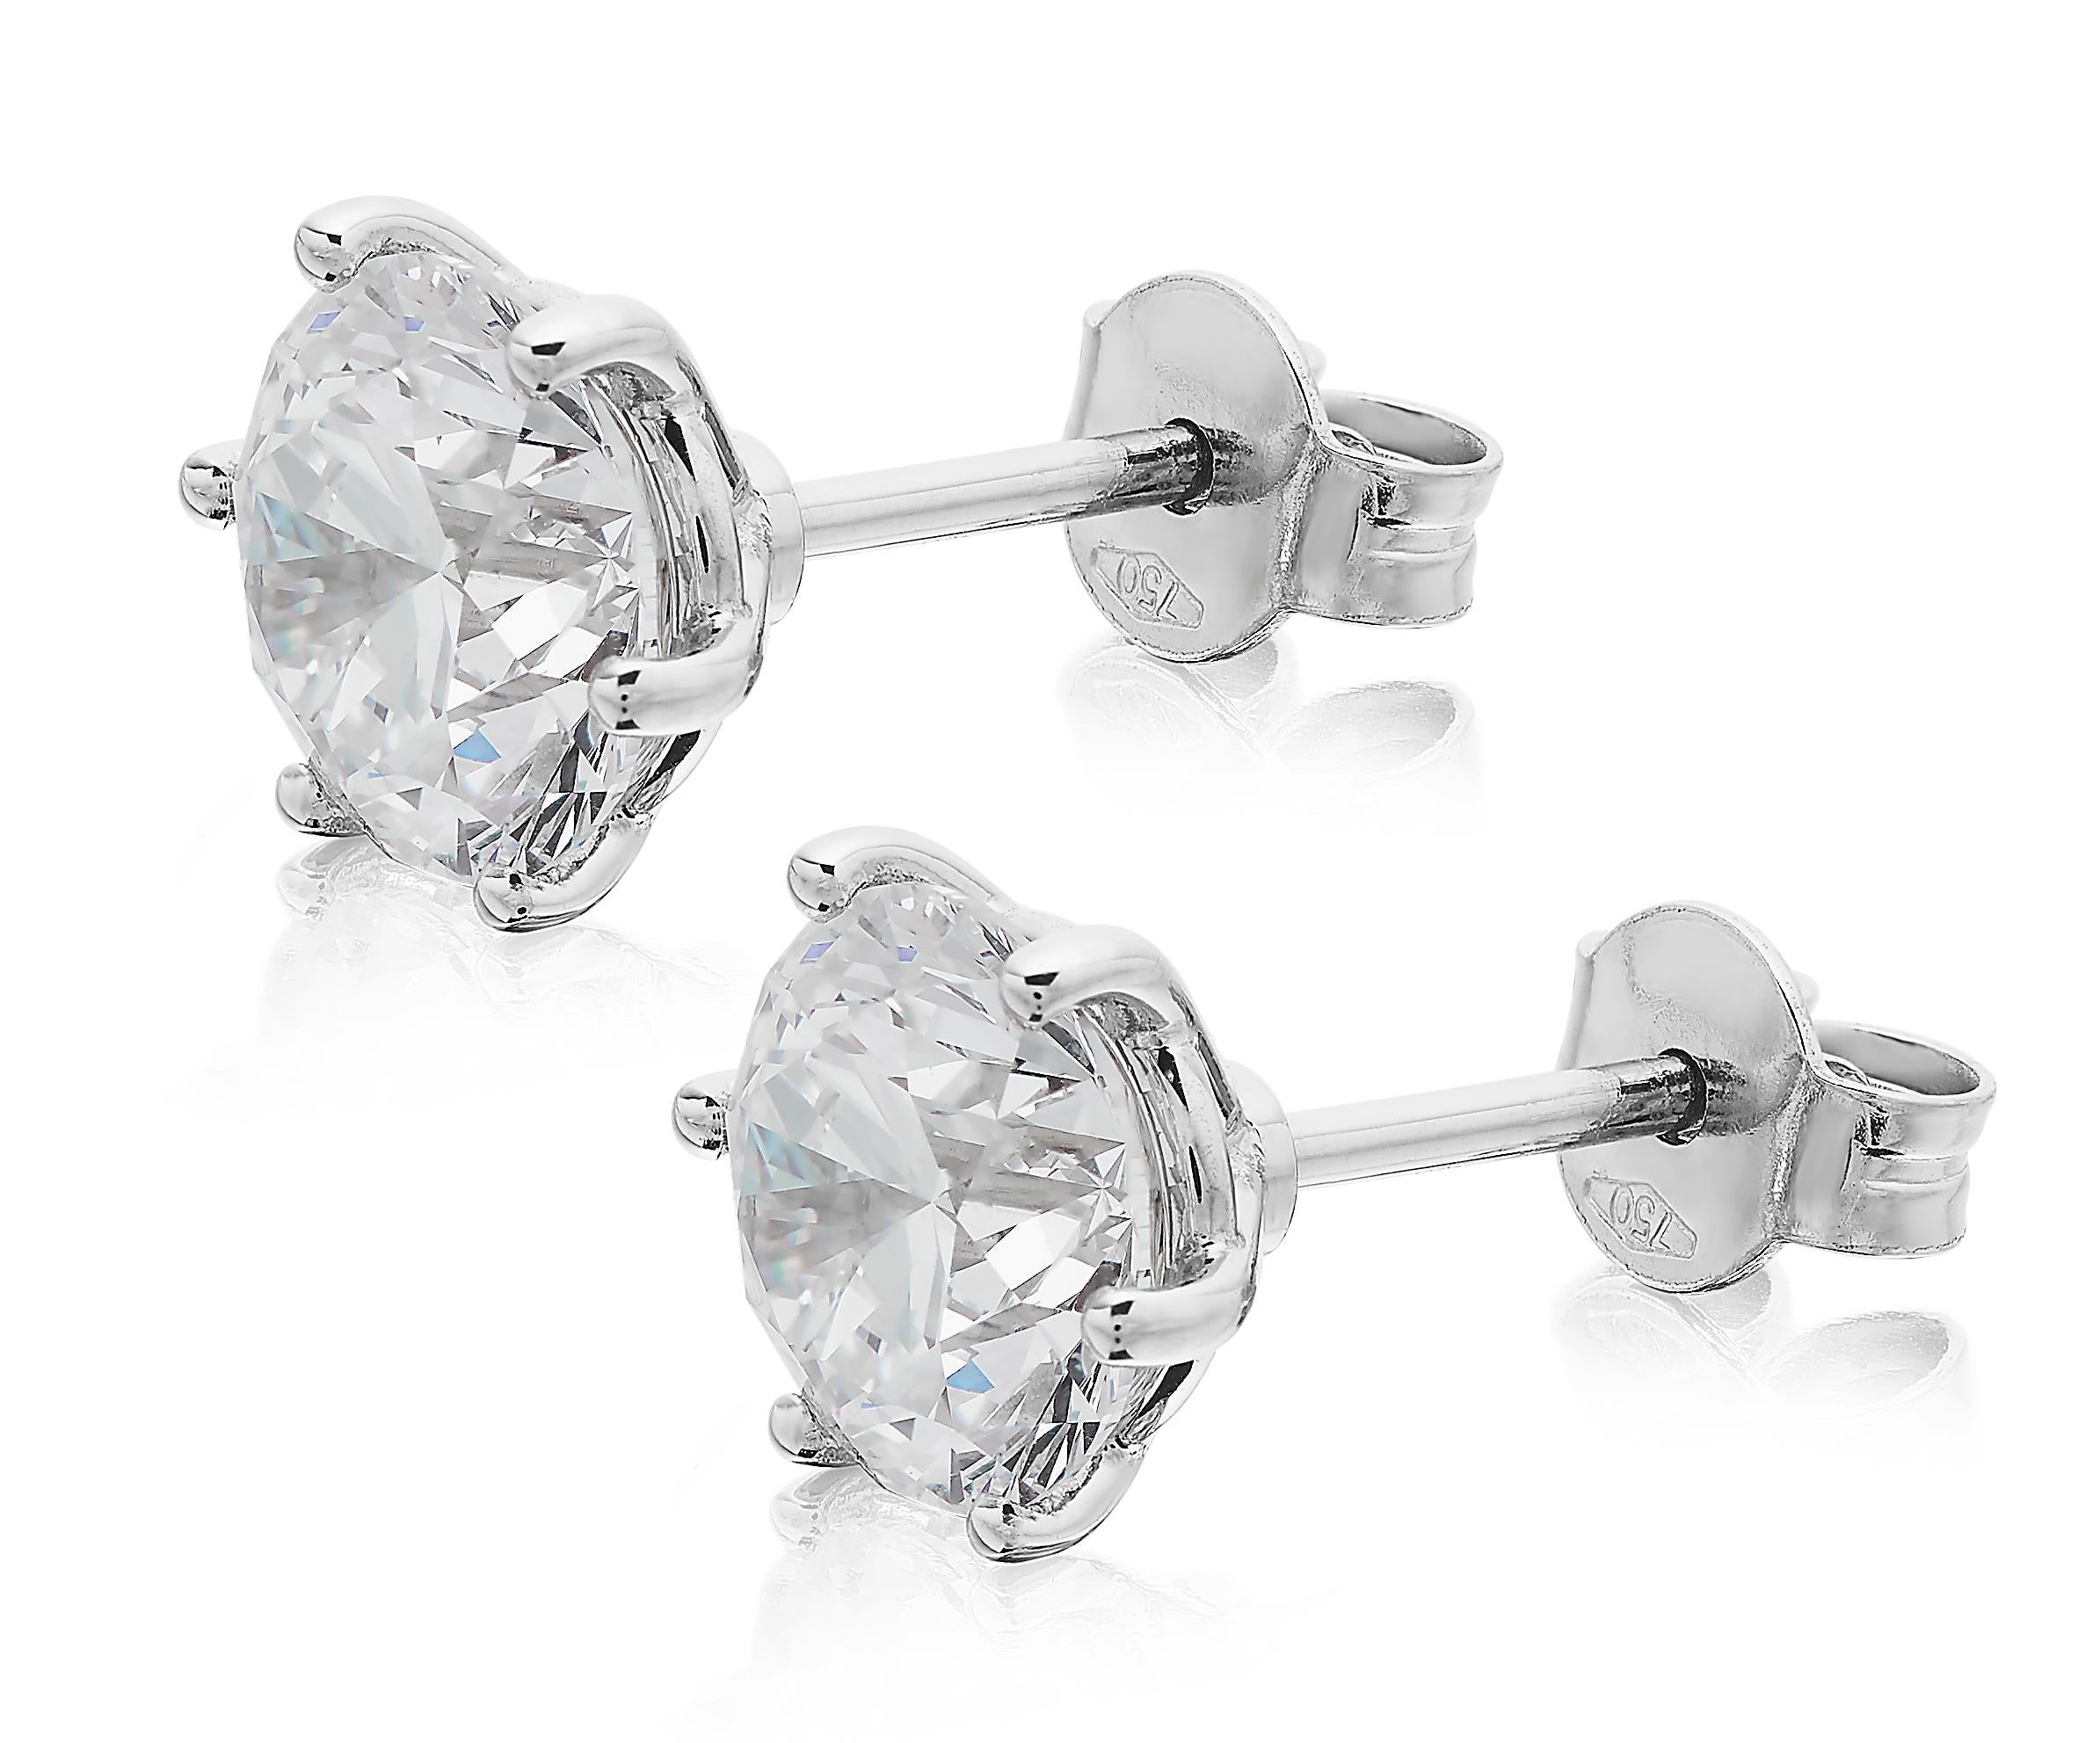 GIA Certified Solitaire Stud Diamond Earrings, featuring 2 GIA graded round brilliant cut diamonds 2.03 and 2.01 carats each, set in platinum specially handmade to fit upright upon any size of ears. Pin fitting with 18ct white gold butterfly spare